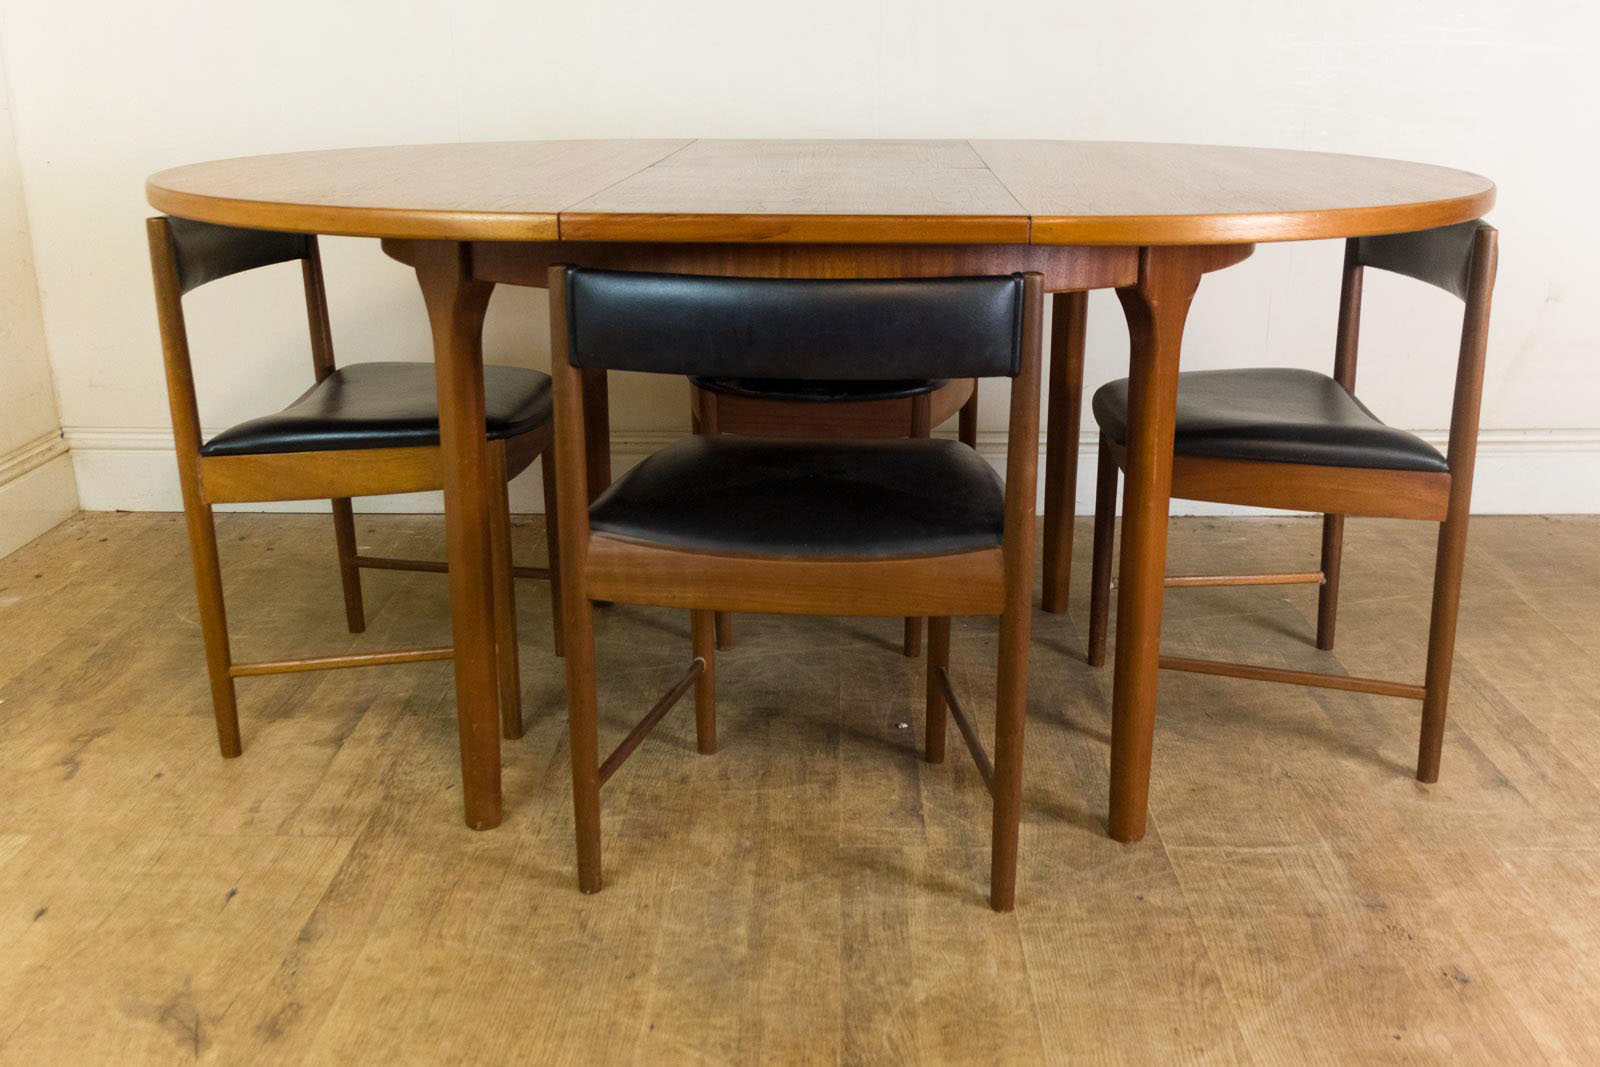 Table With Chairs That Tuck Under - Rare Hans Olsen Teak Table with